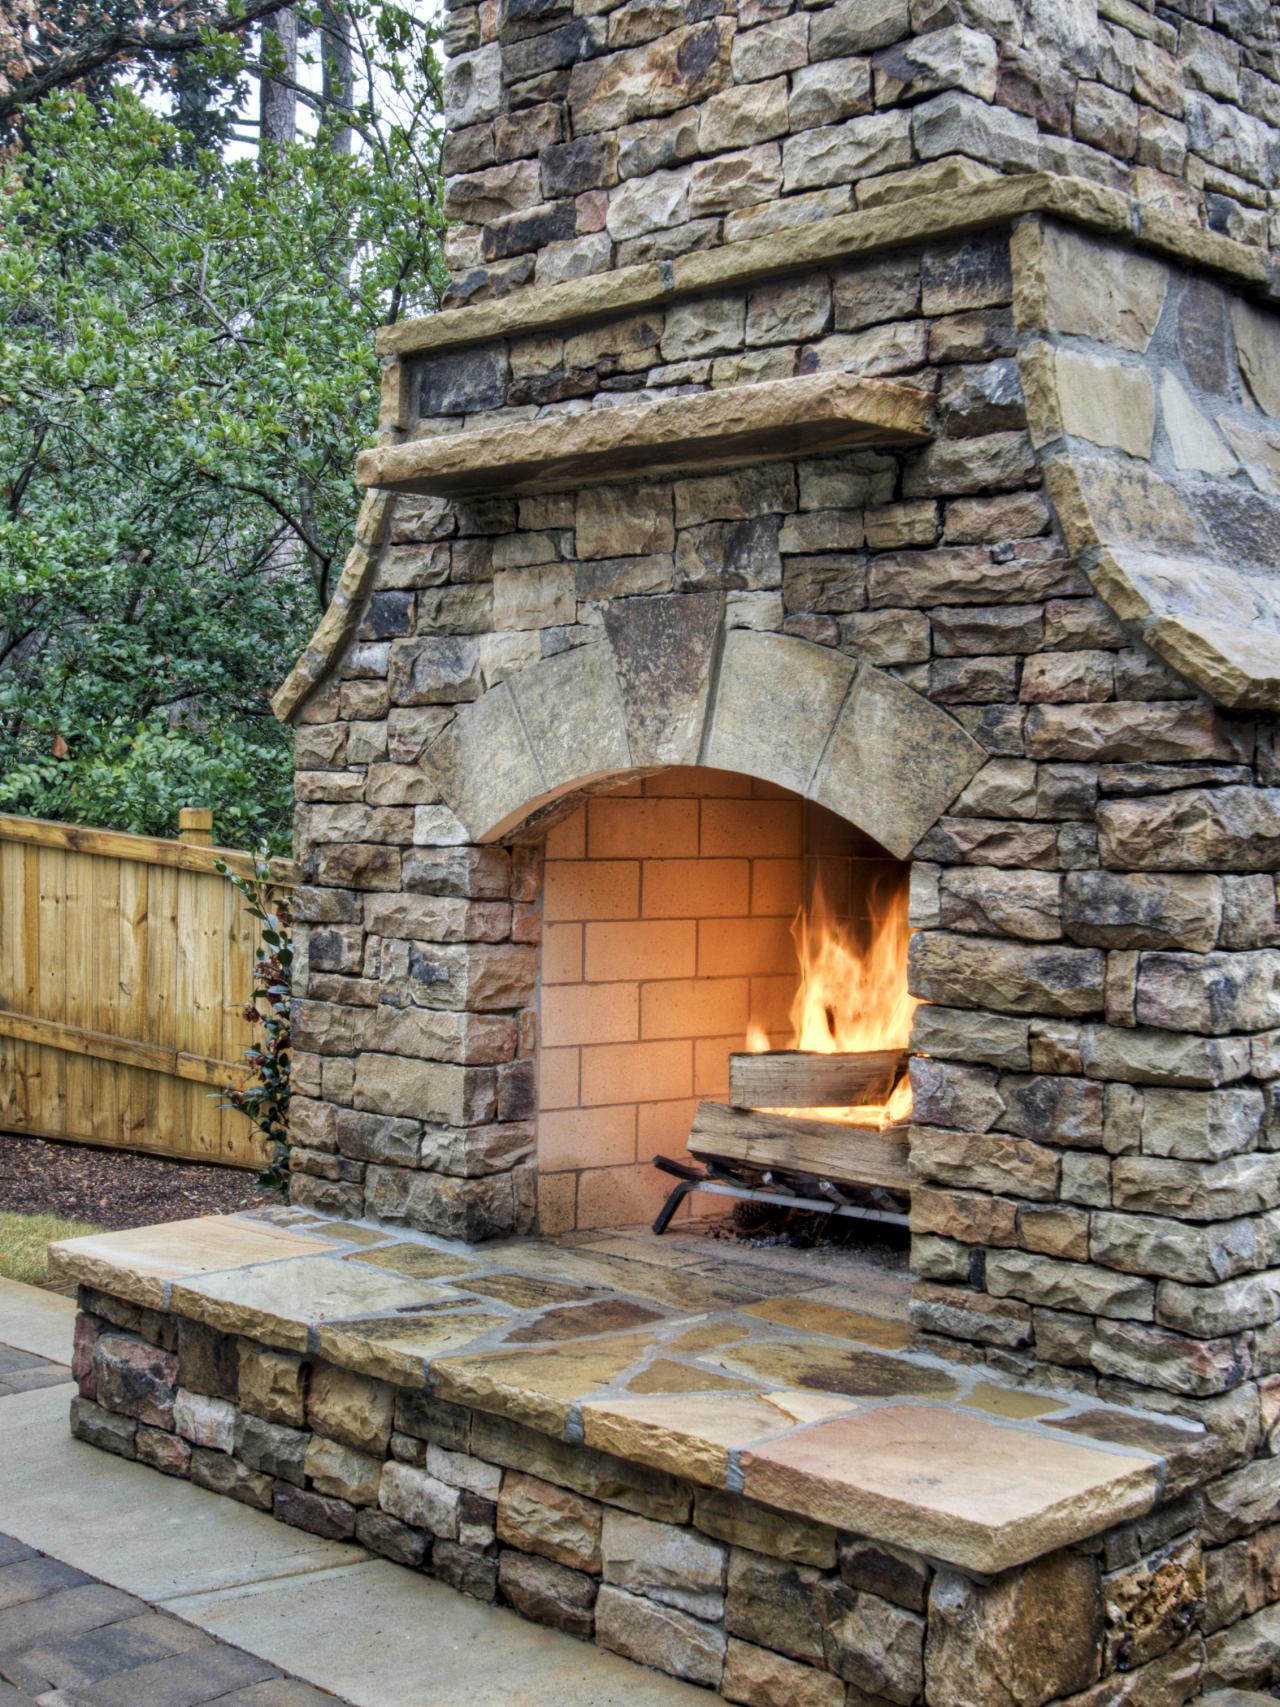 Add fireside ambiance to your backyard with an outdoor fireplace made with stacked stone. HGTV.com experts share everything you need to build an outdoor fireplace.